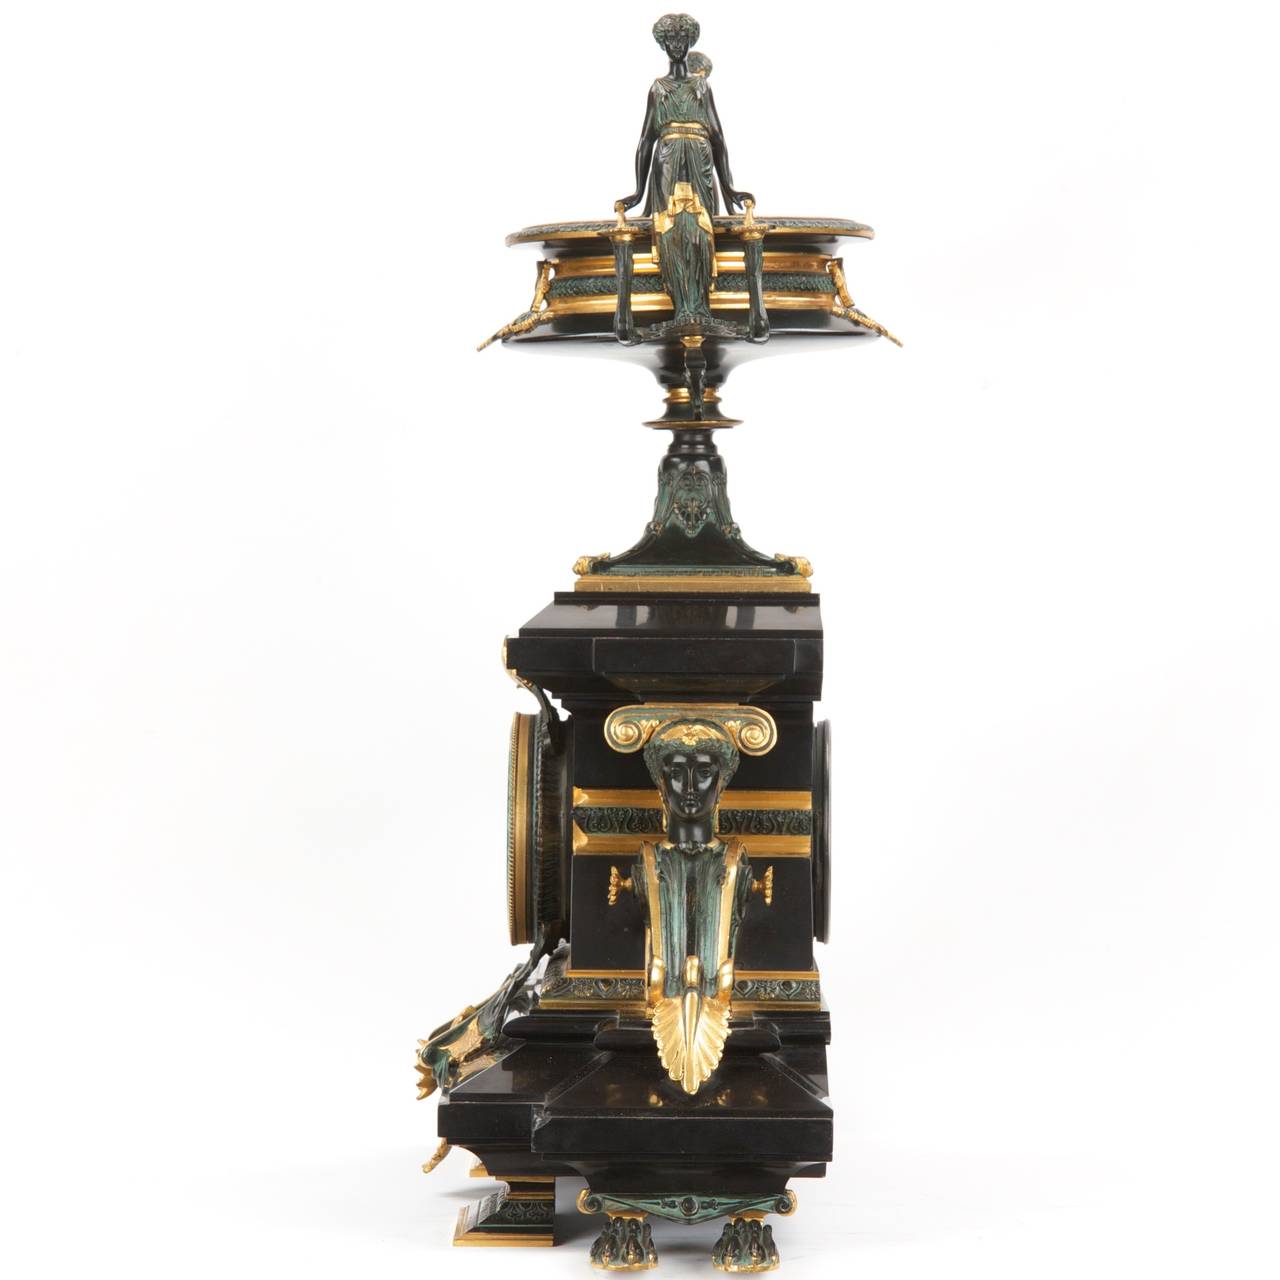 Late 19th Century Egyptian Revival Antique Bronze Clock Garniture by Tiffany & Co c. 1880